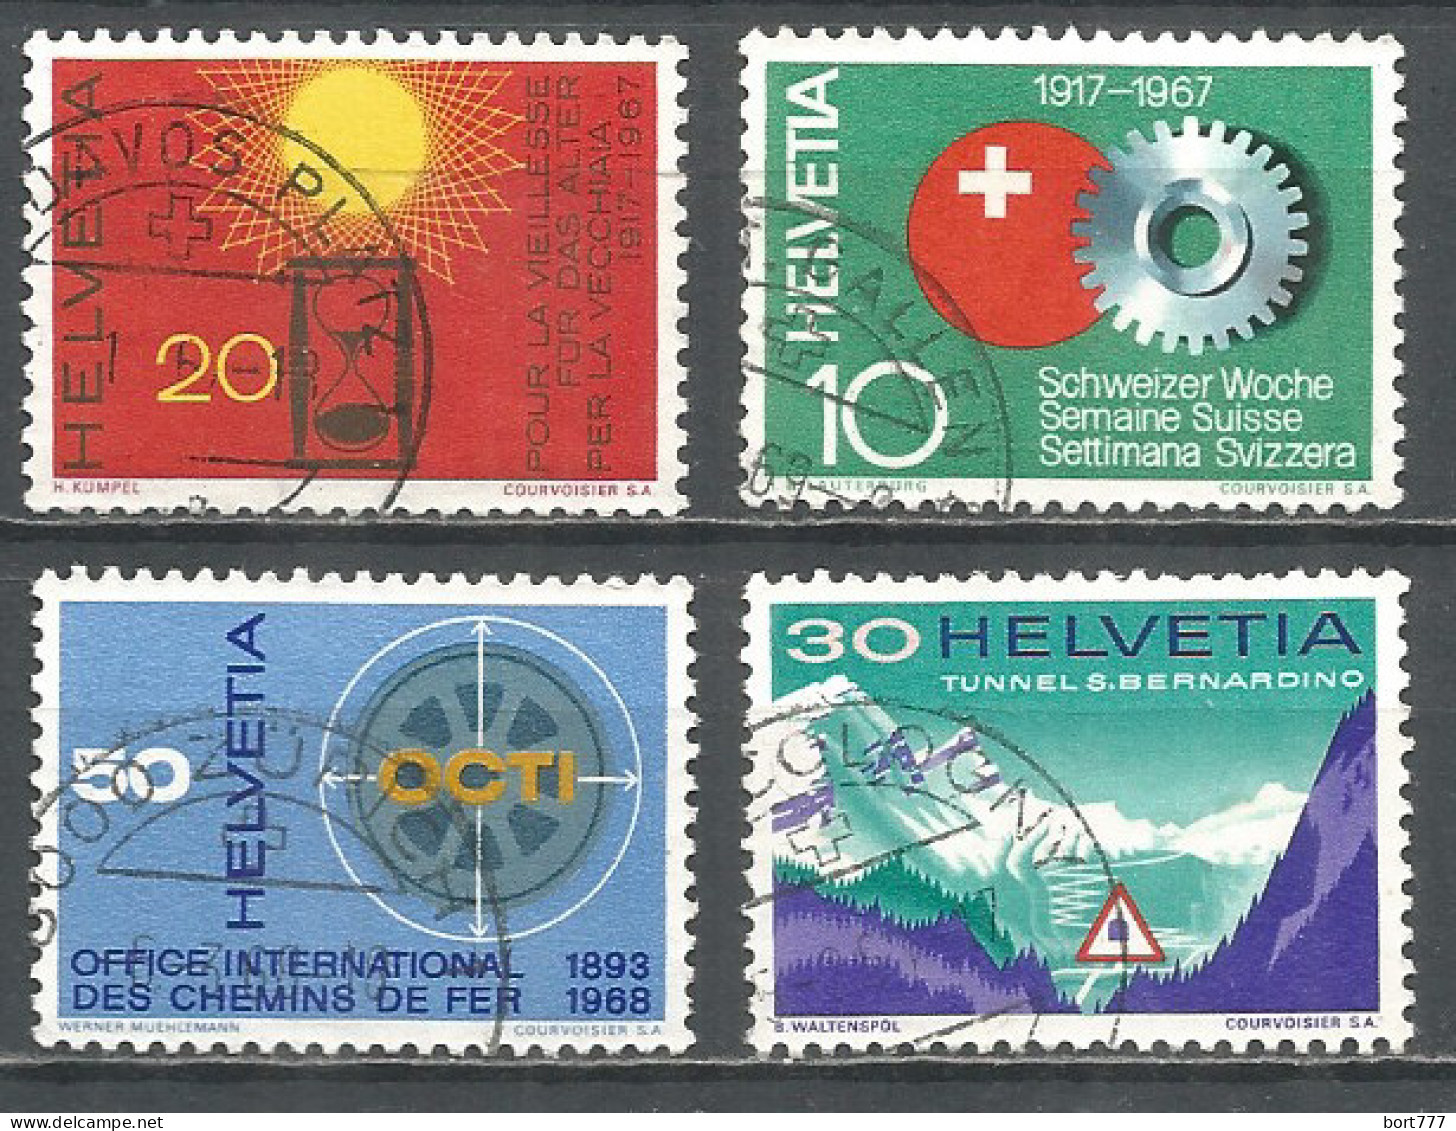 Switzerland 1967 Year , Used Stamps Mi # 858-61 - Used Stamps